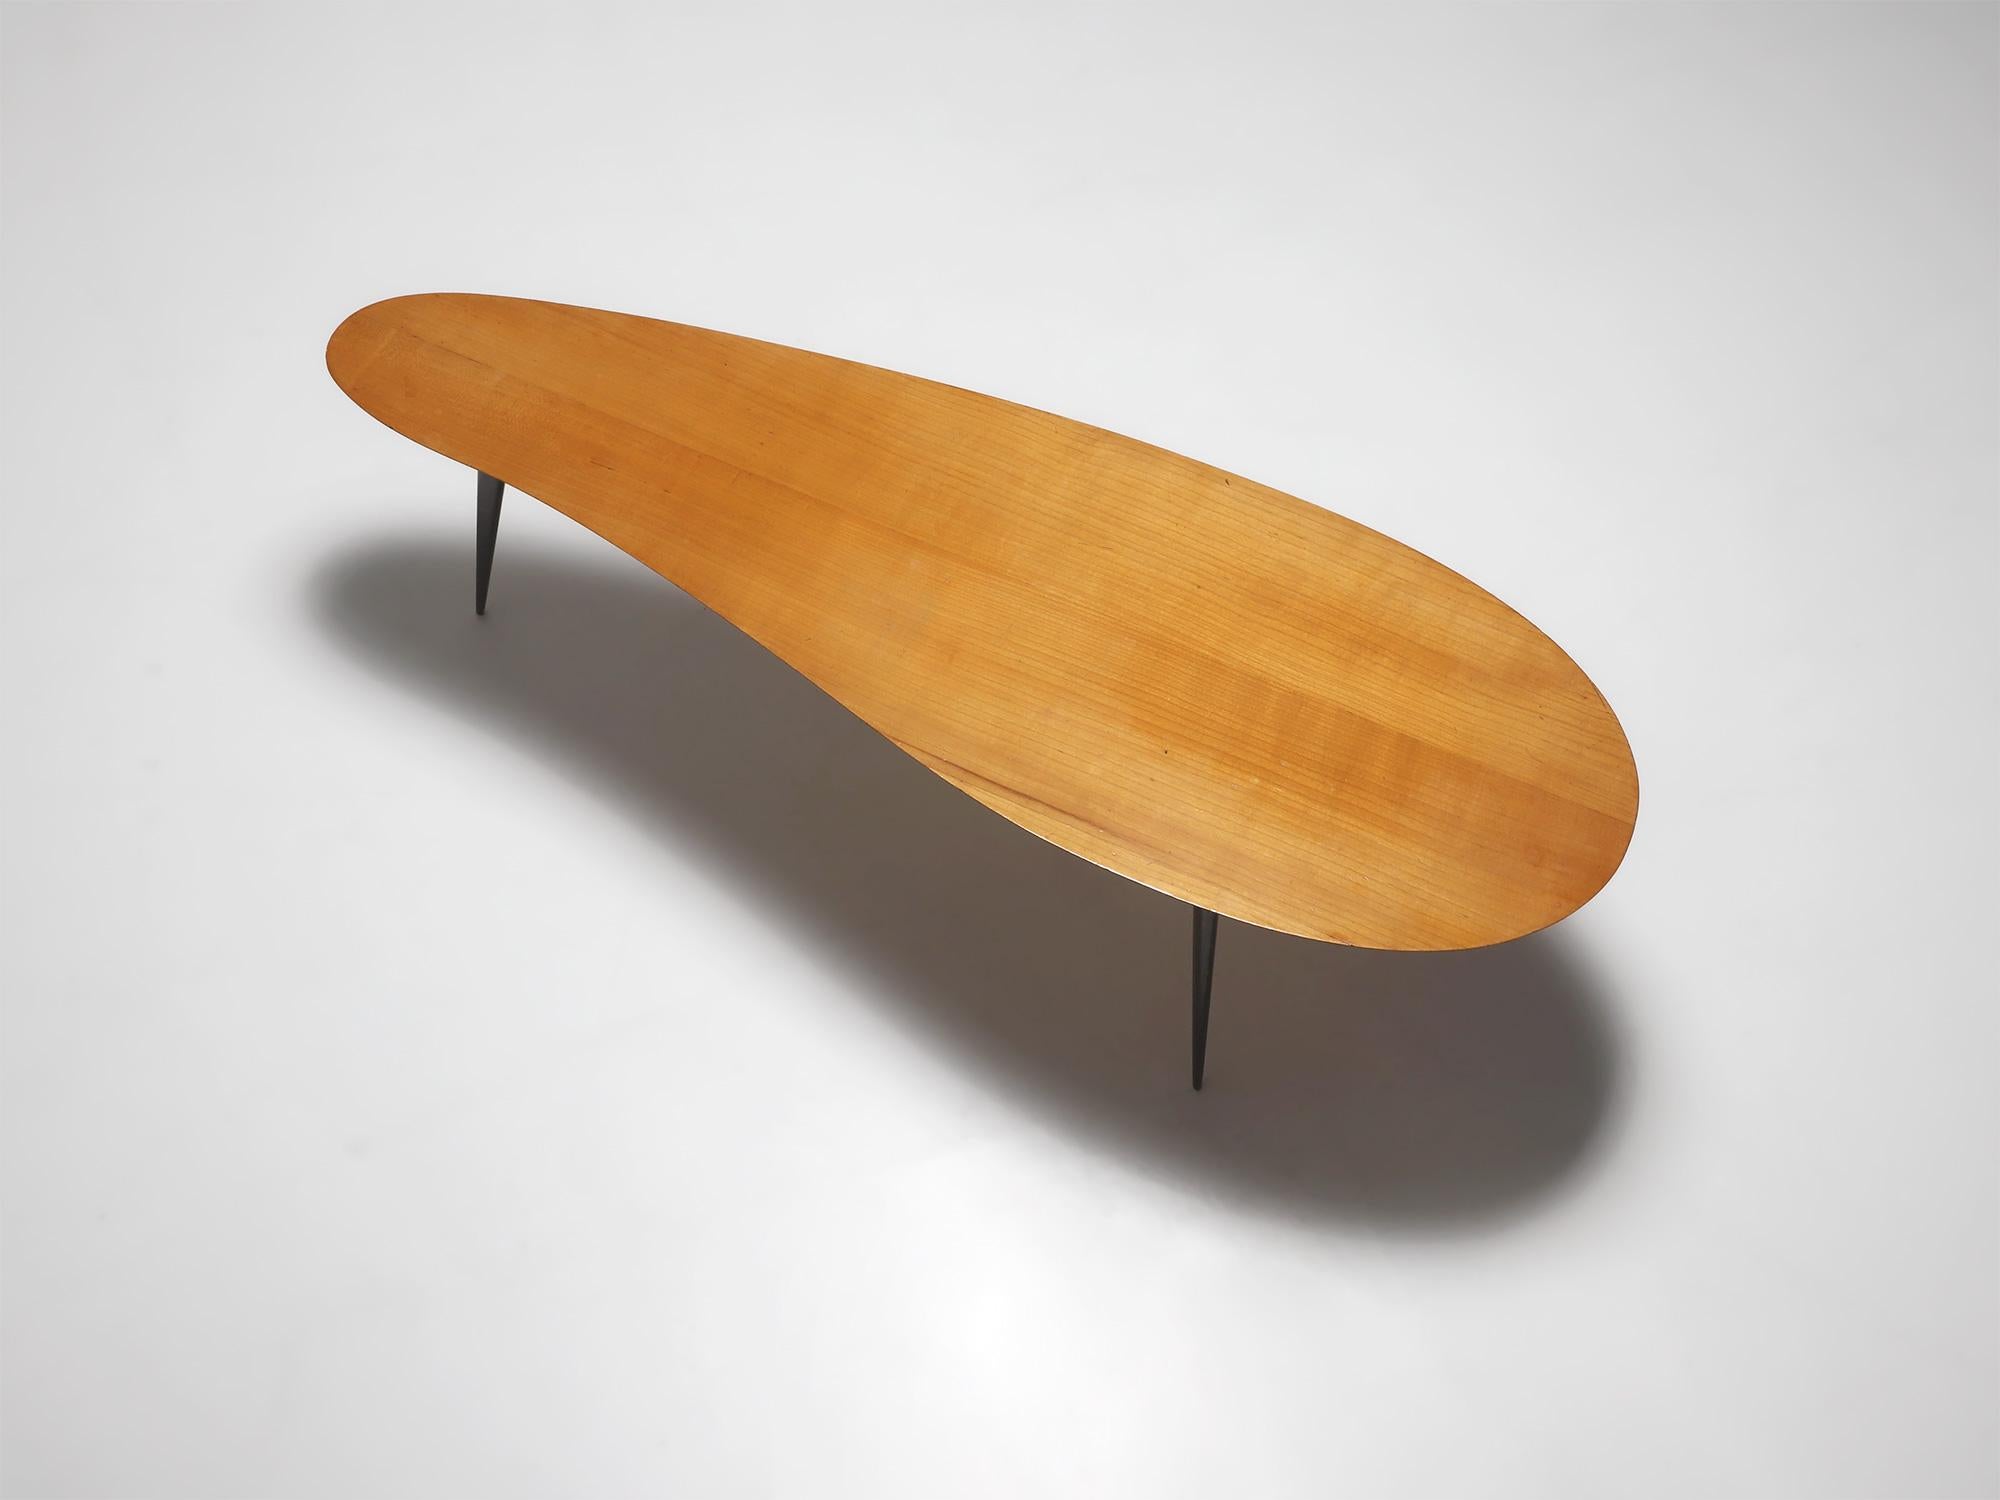 Beautiful handcrafted kidney shaped coffee table made in the 1950s. This elegant mid century coffee table has three solid triangular wood legs and is made in pear wood, a strong but light wood with a honey colored look. The shape is perfect for use